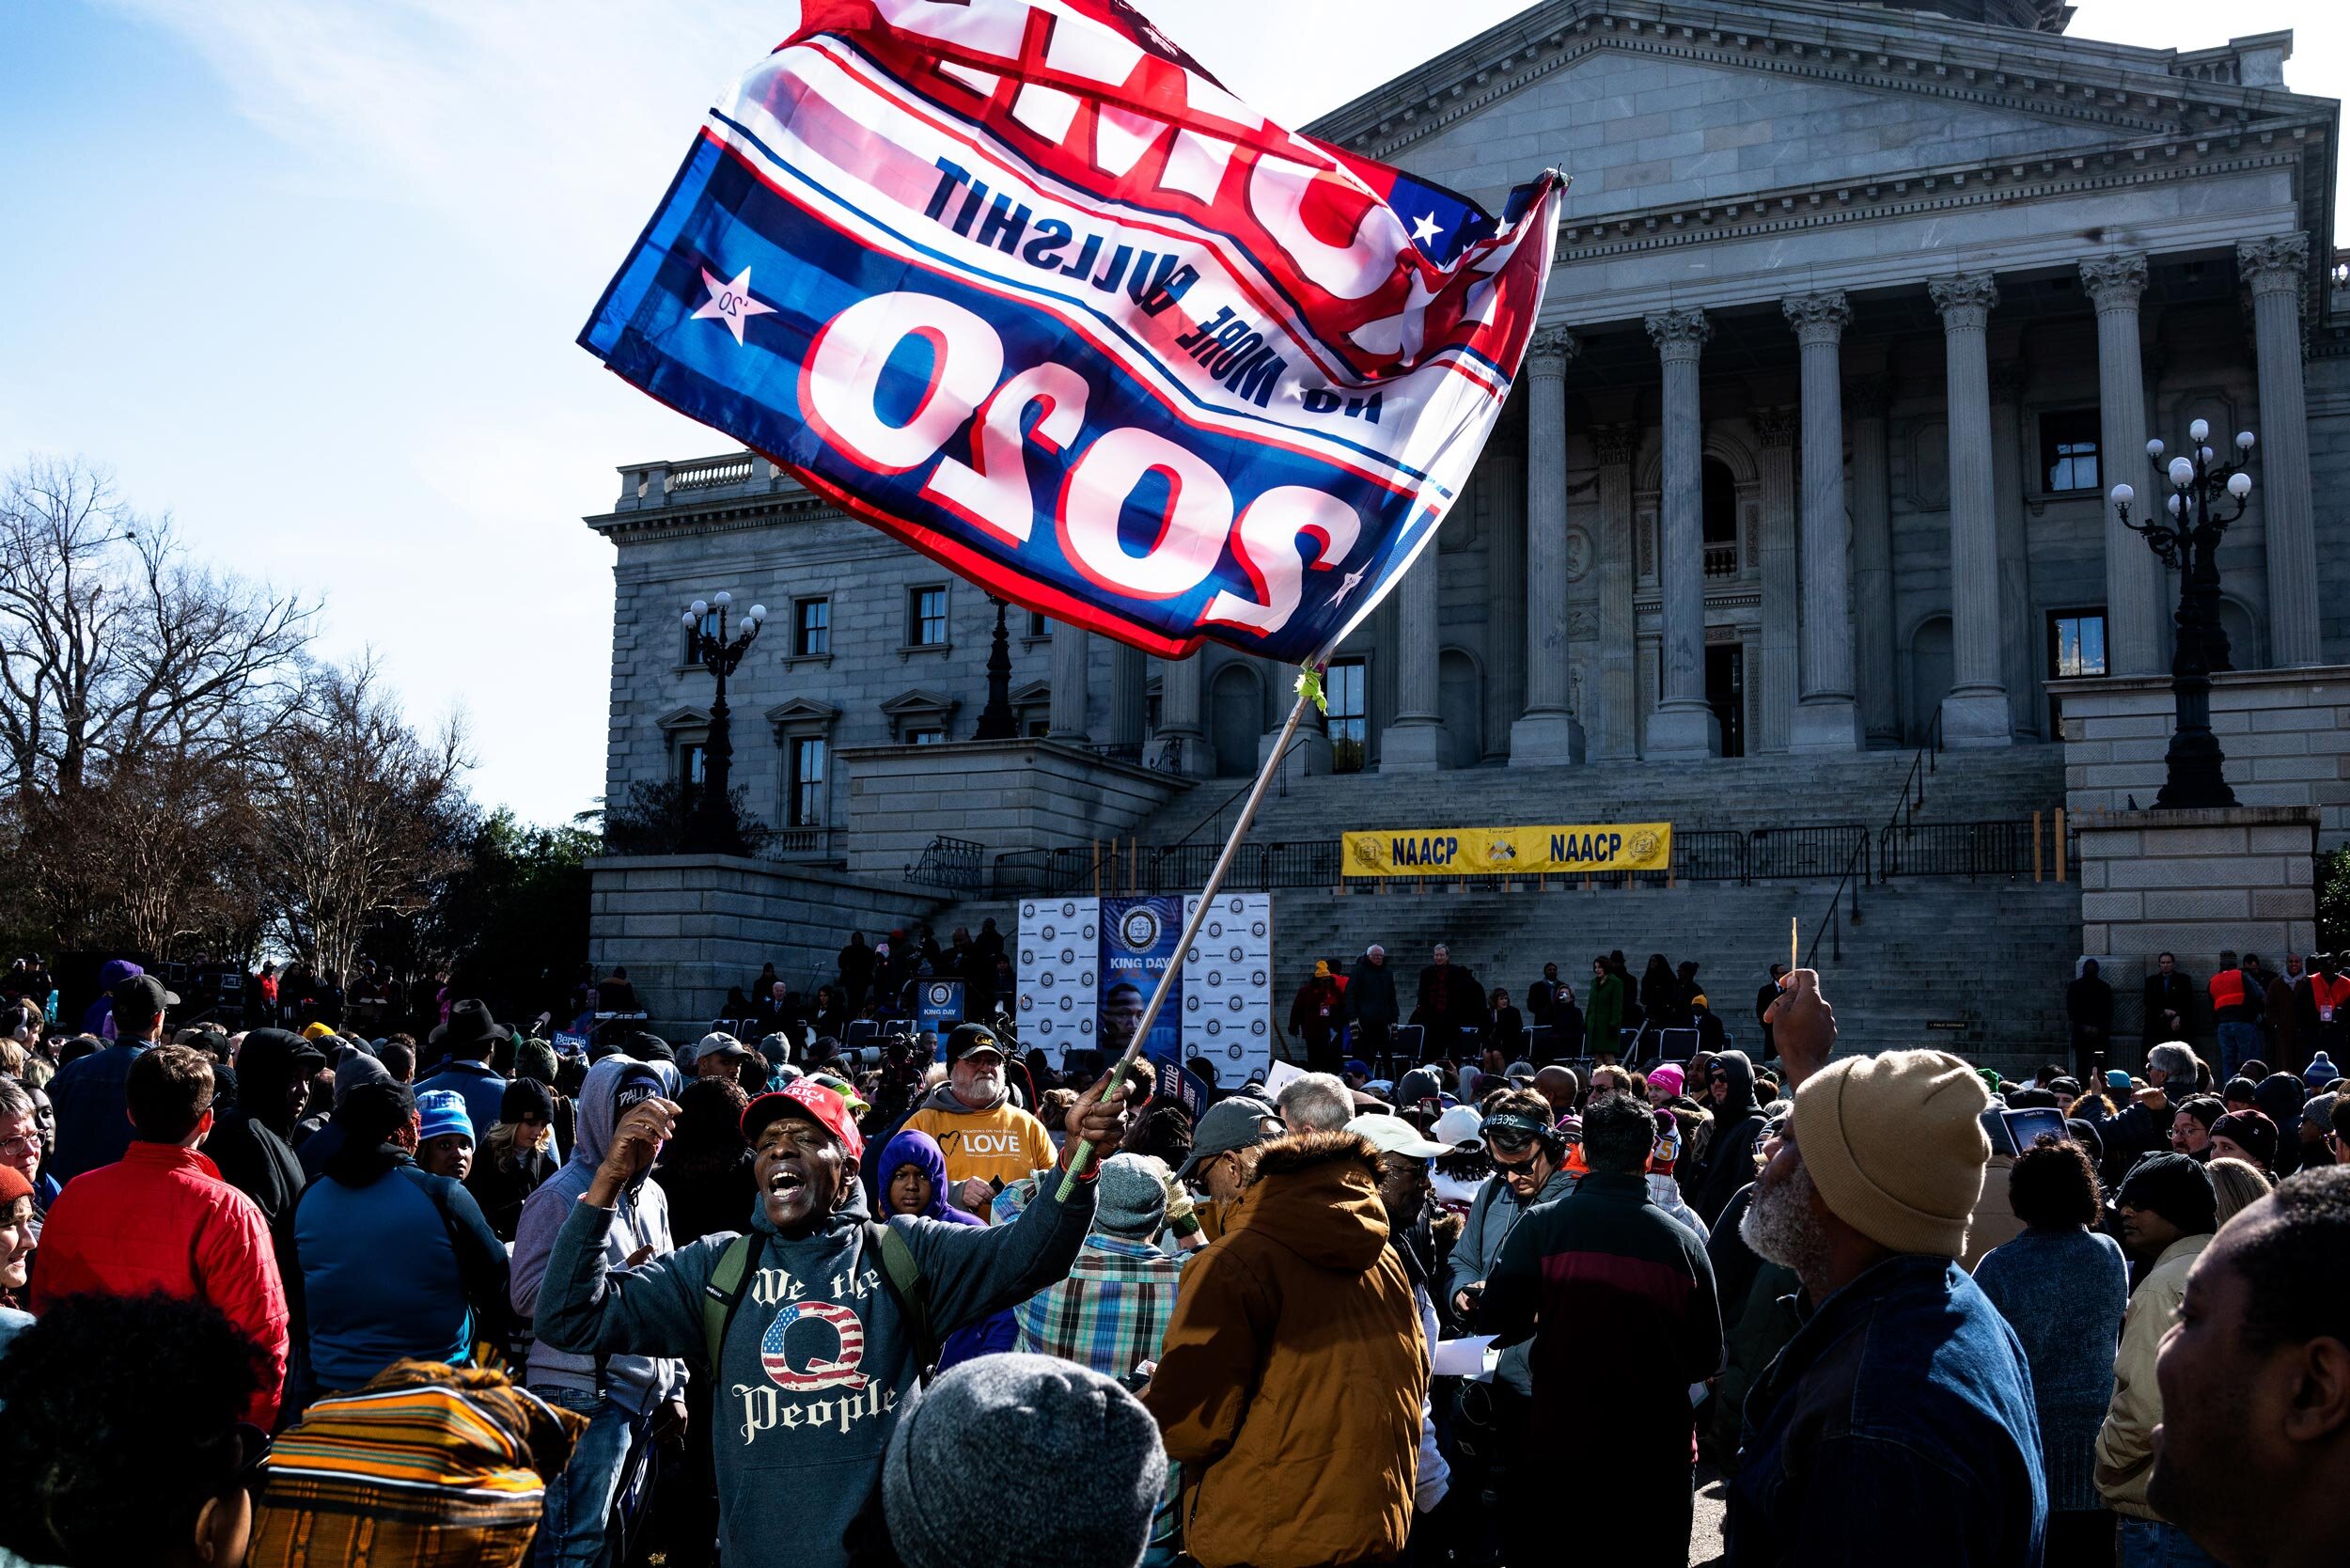   A Trump supporter shouts and waves a Trump 2020 flag during the MLK Day celebration at the South Carolina Statehouse in Columbia, South Carolina. In attendance was the 2020 Democratic candidates and state and city officials.   